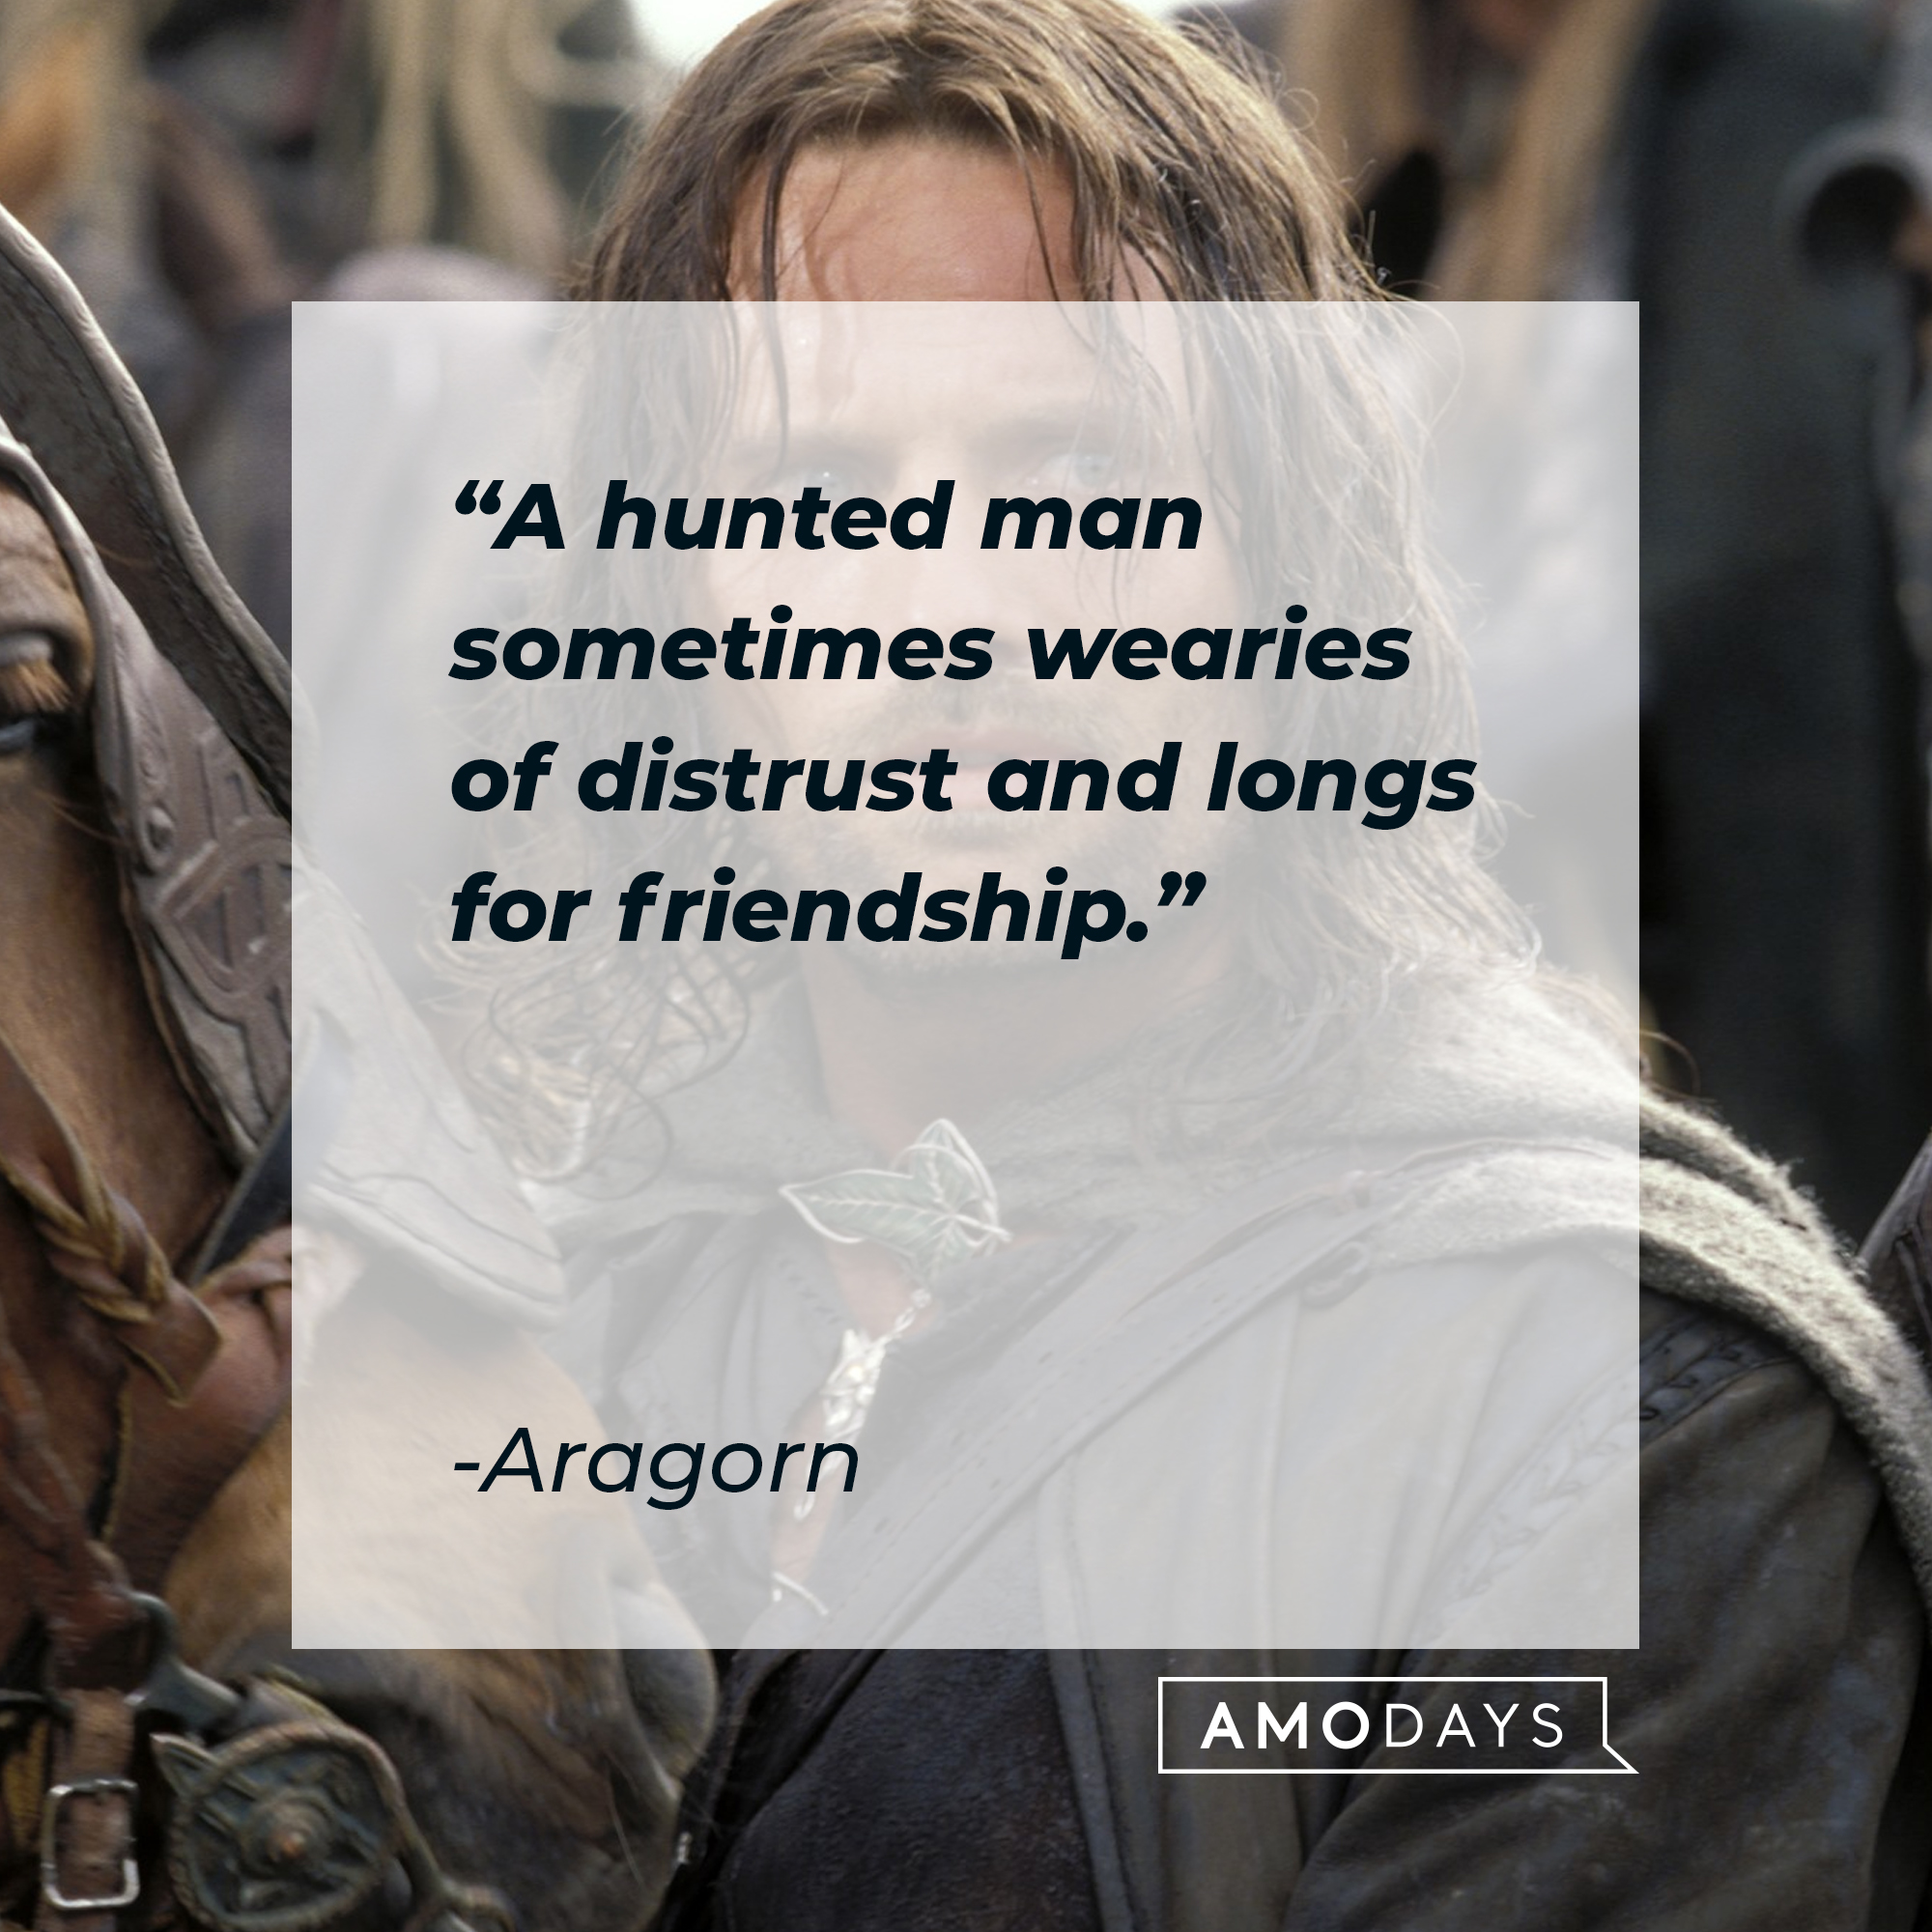 Aragorn with his quote from "The Lord of the Rings:" "A hunted man sometimes wearies of distrust and longs for friendship." | Source: Facebook/lordoftheringstrilogy